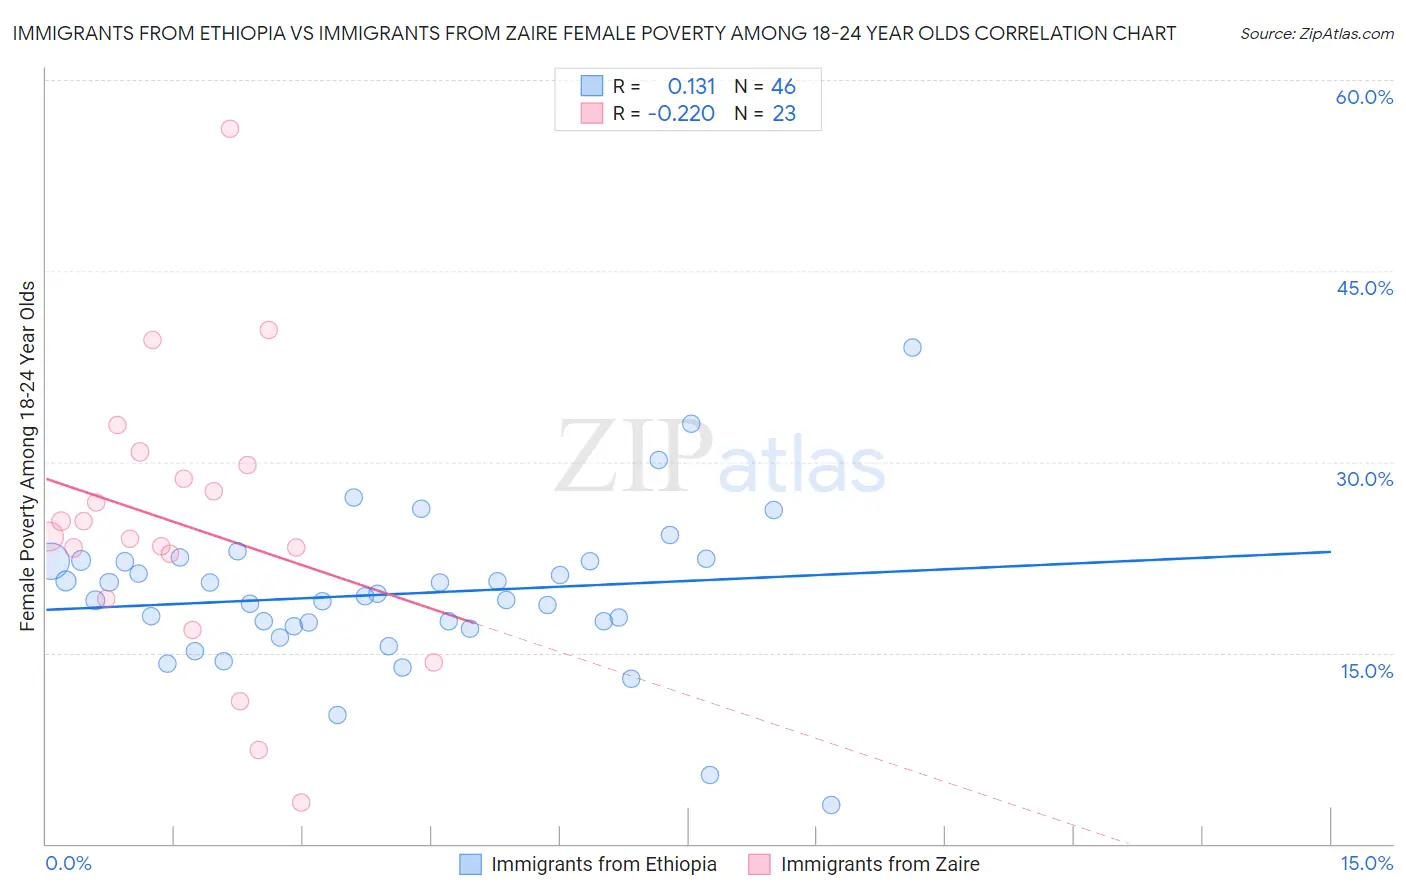 Immigrants from Ethiopia vs Immigrants from Zaire Female Poverty Among 18-24 Year Olds